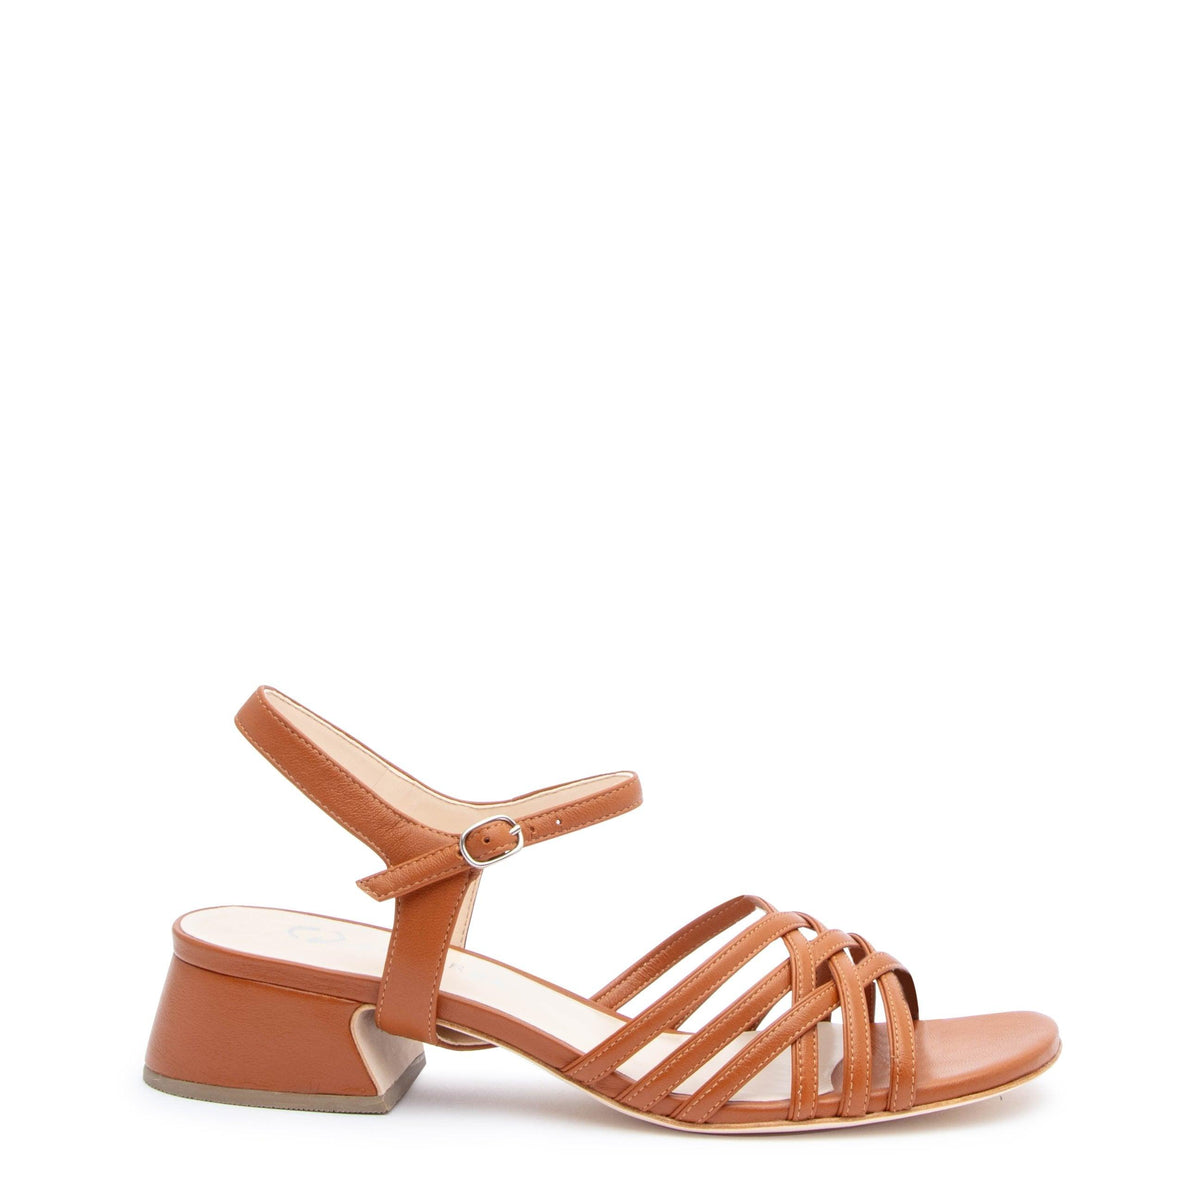 Cognac Bell Sandal + Jackie Customized Sandals | Alterre Interchangeable Sandals - Sustainable Footwear & Ethical Shoes